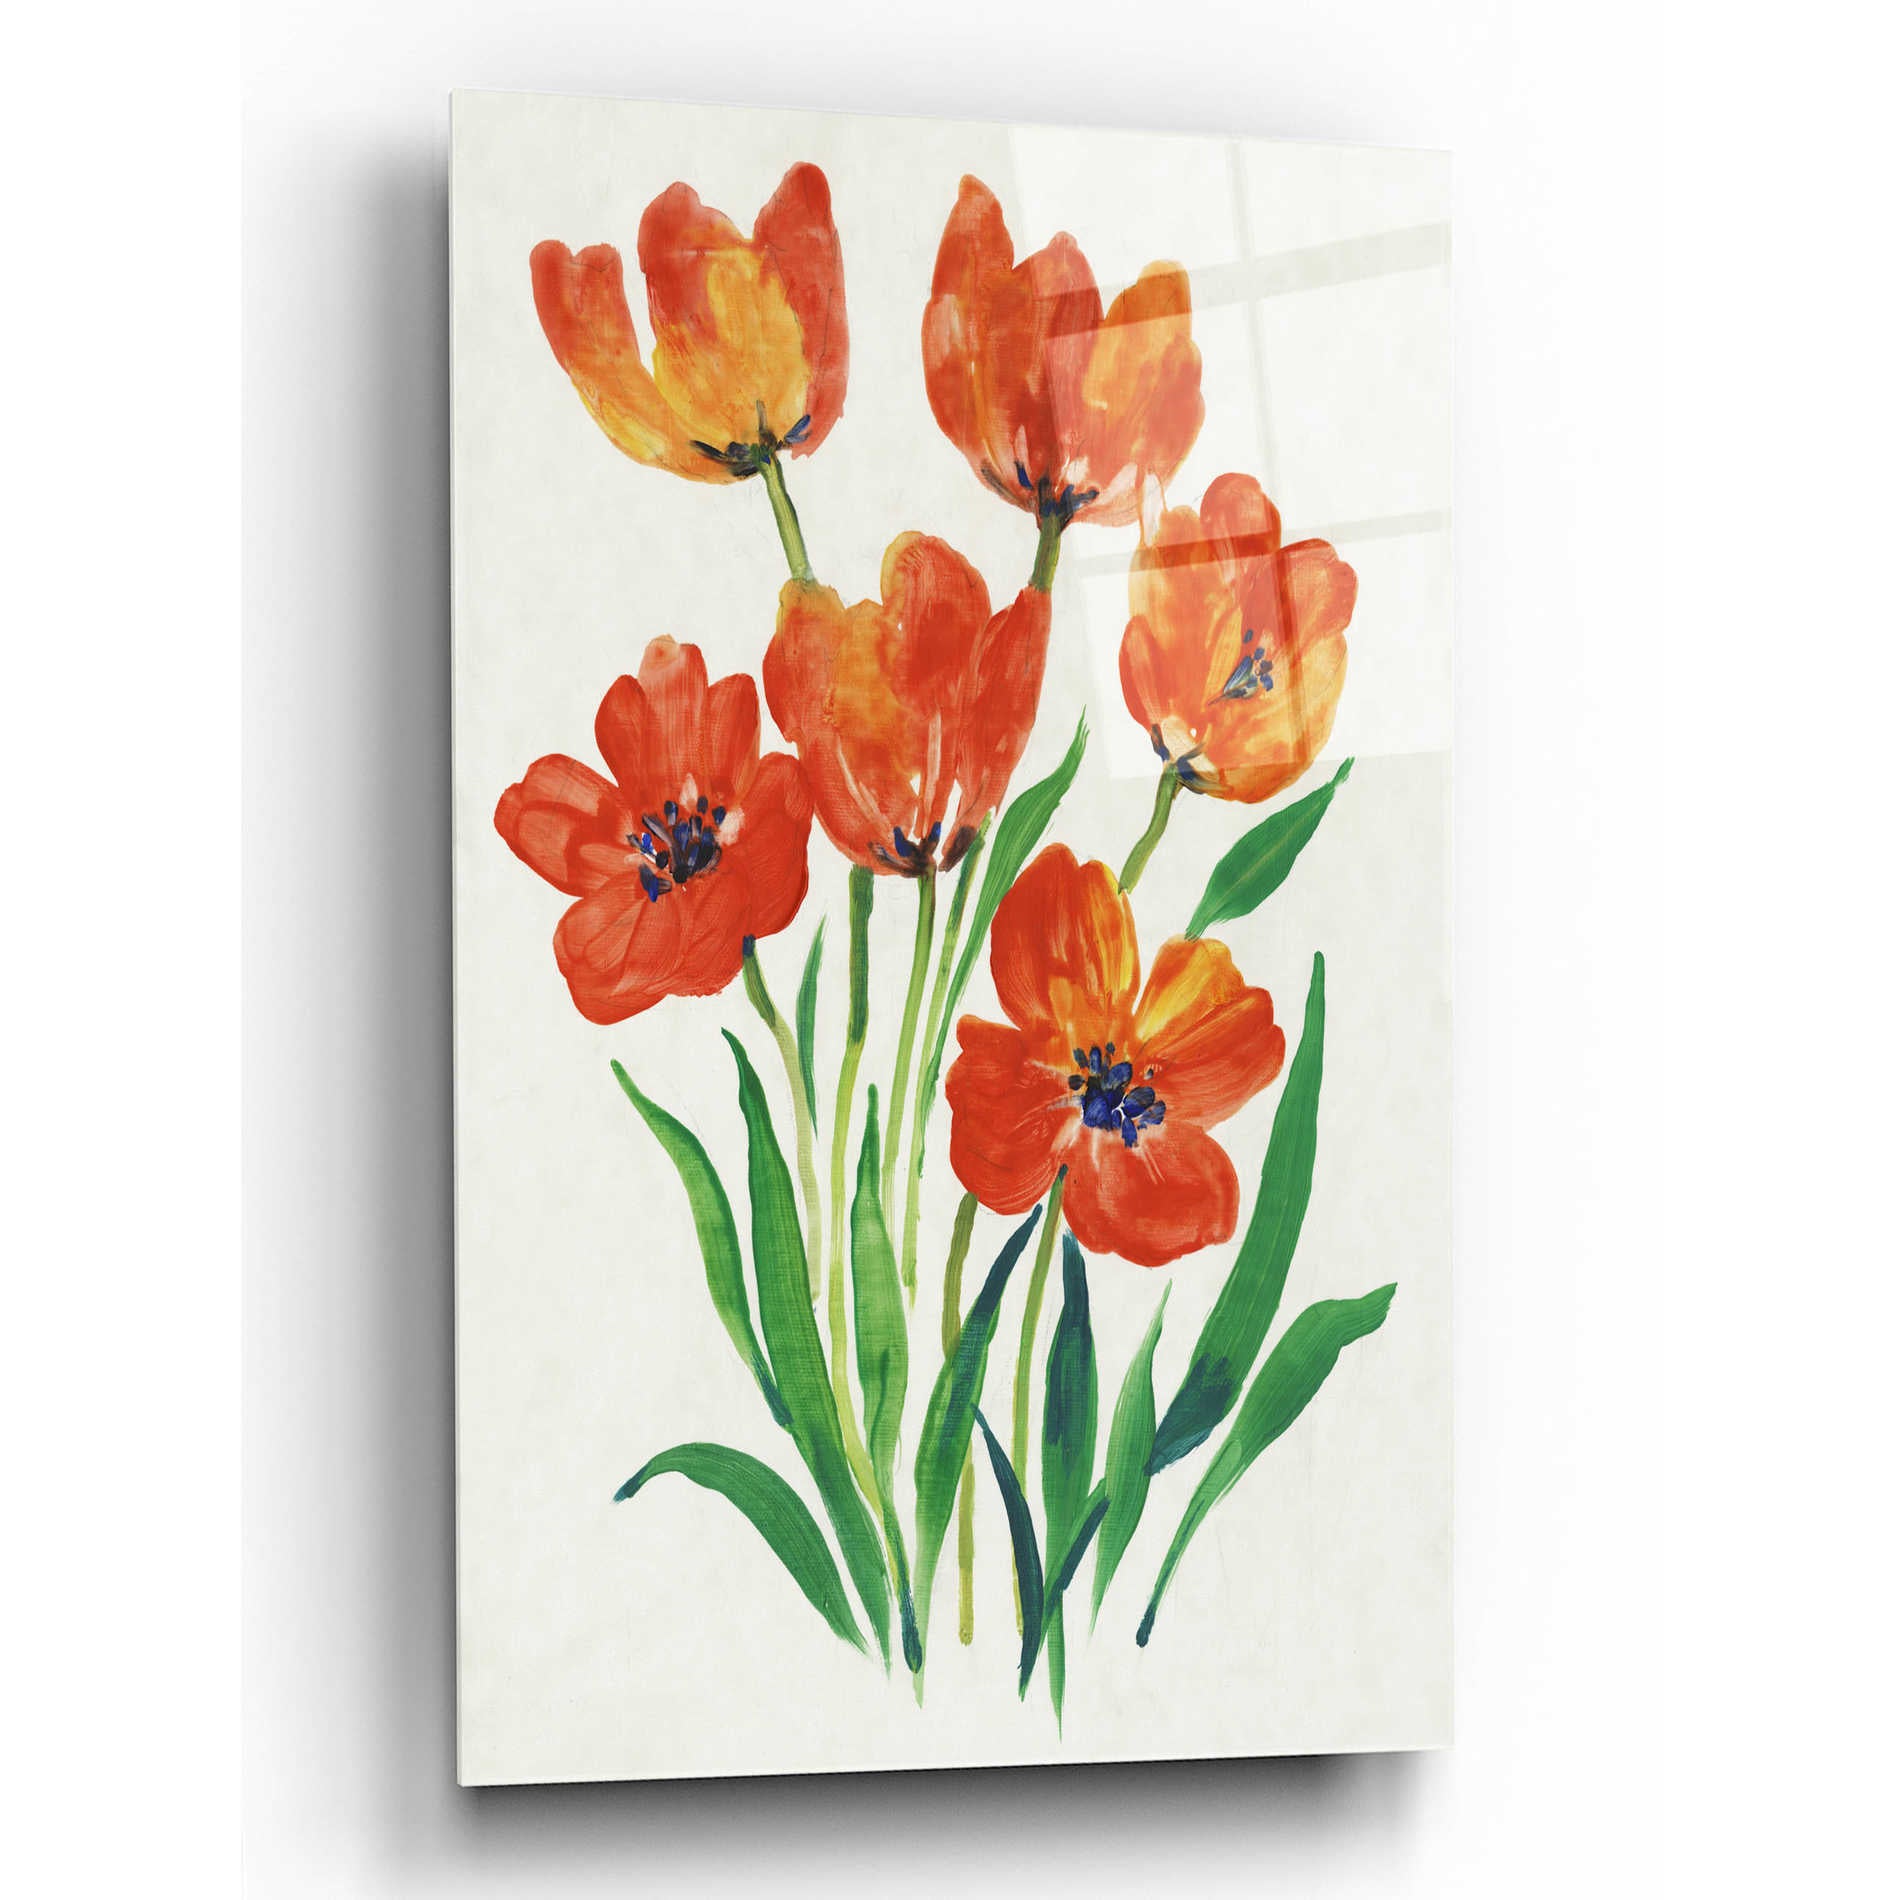 Epic Art 'Red Tulips in Bloom II' by Tim O'Toole, Acrylic Glass Wall Art,12x16